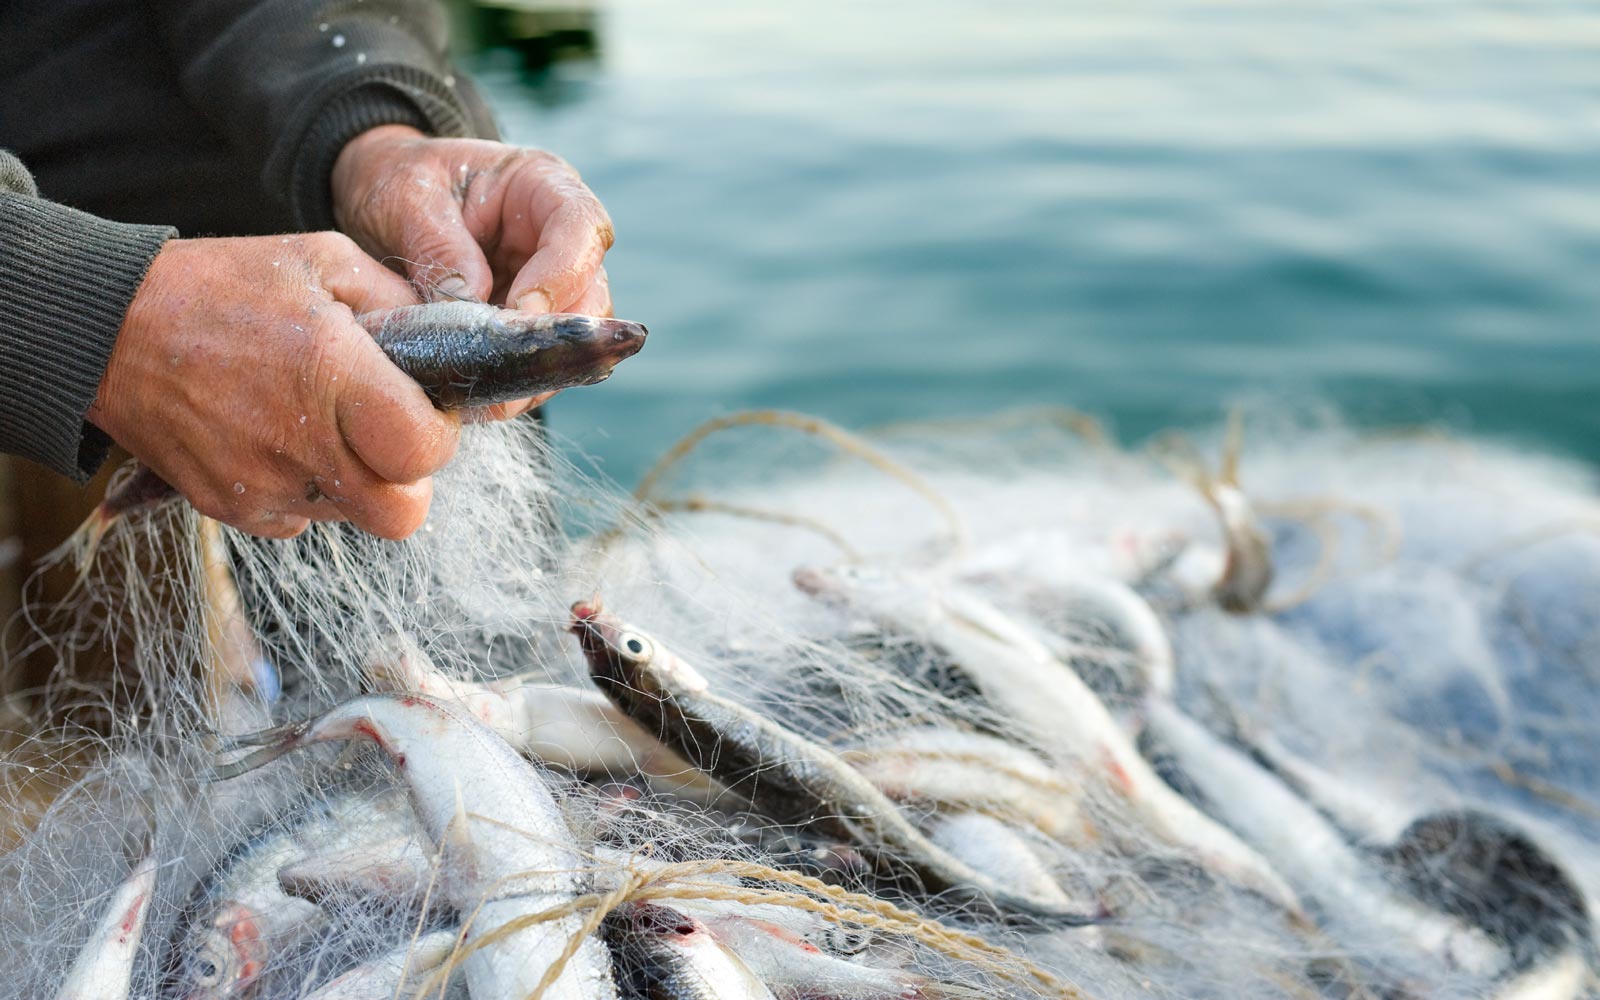 Close-up showing the hands of a person inspecting a netted ocean fish catch